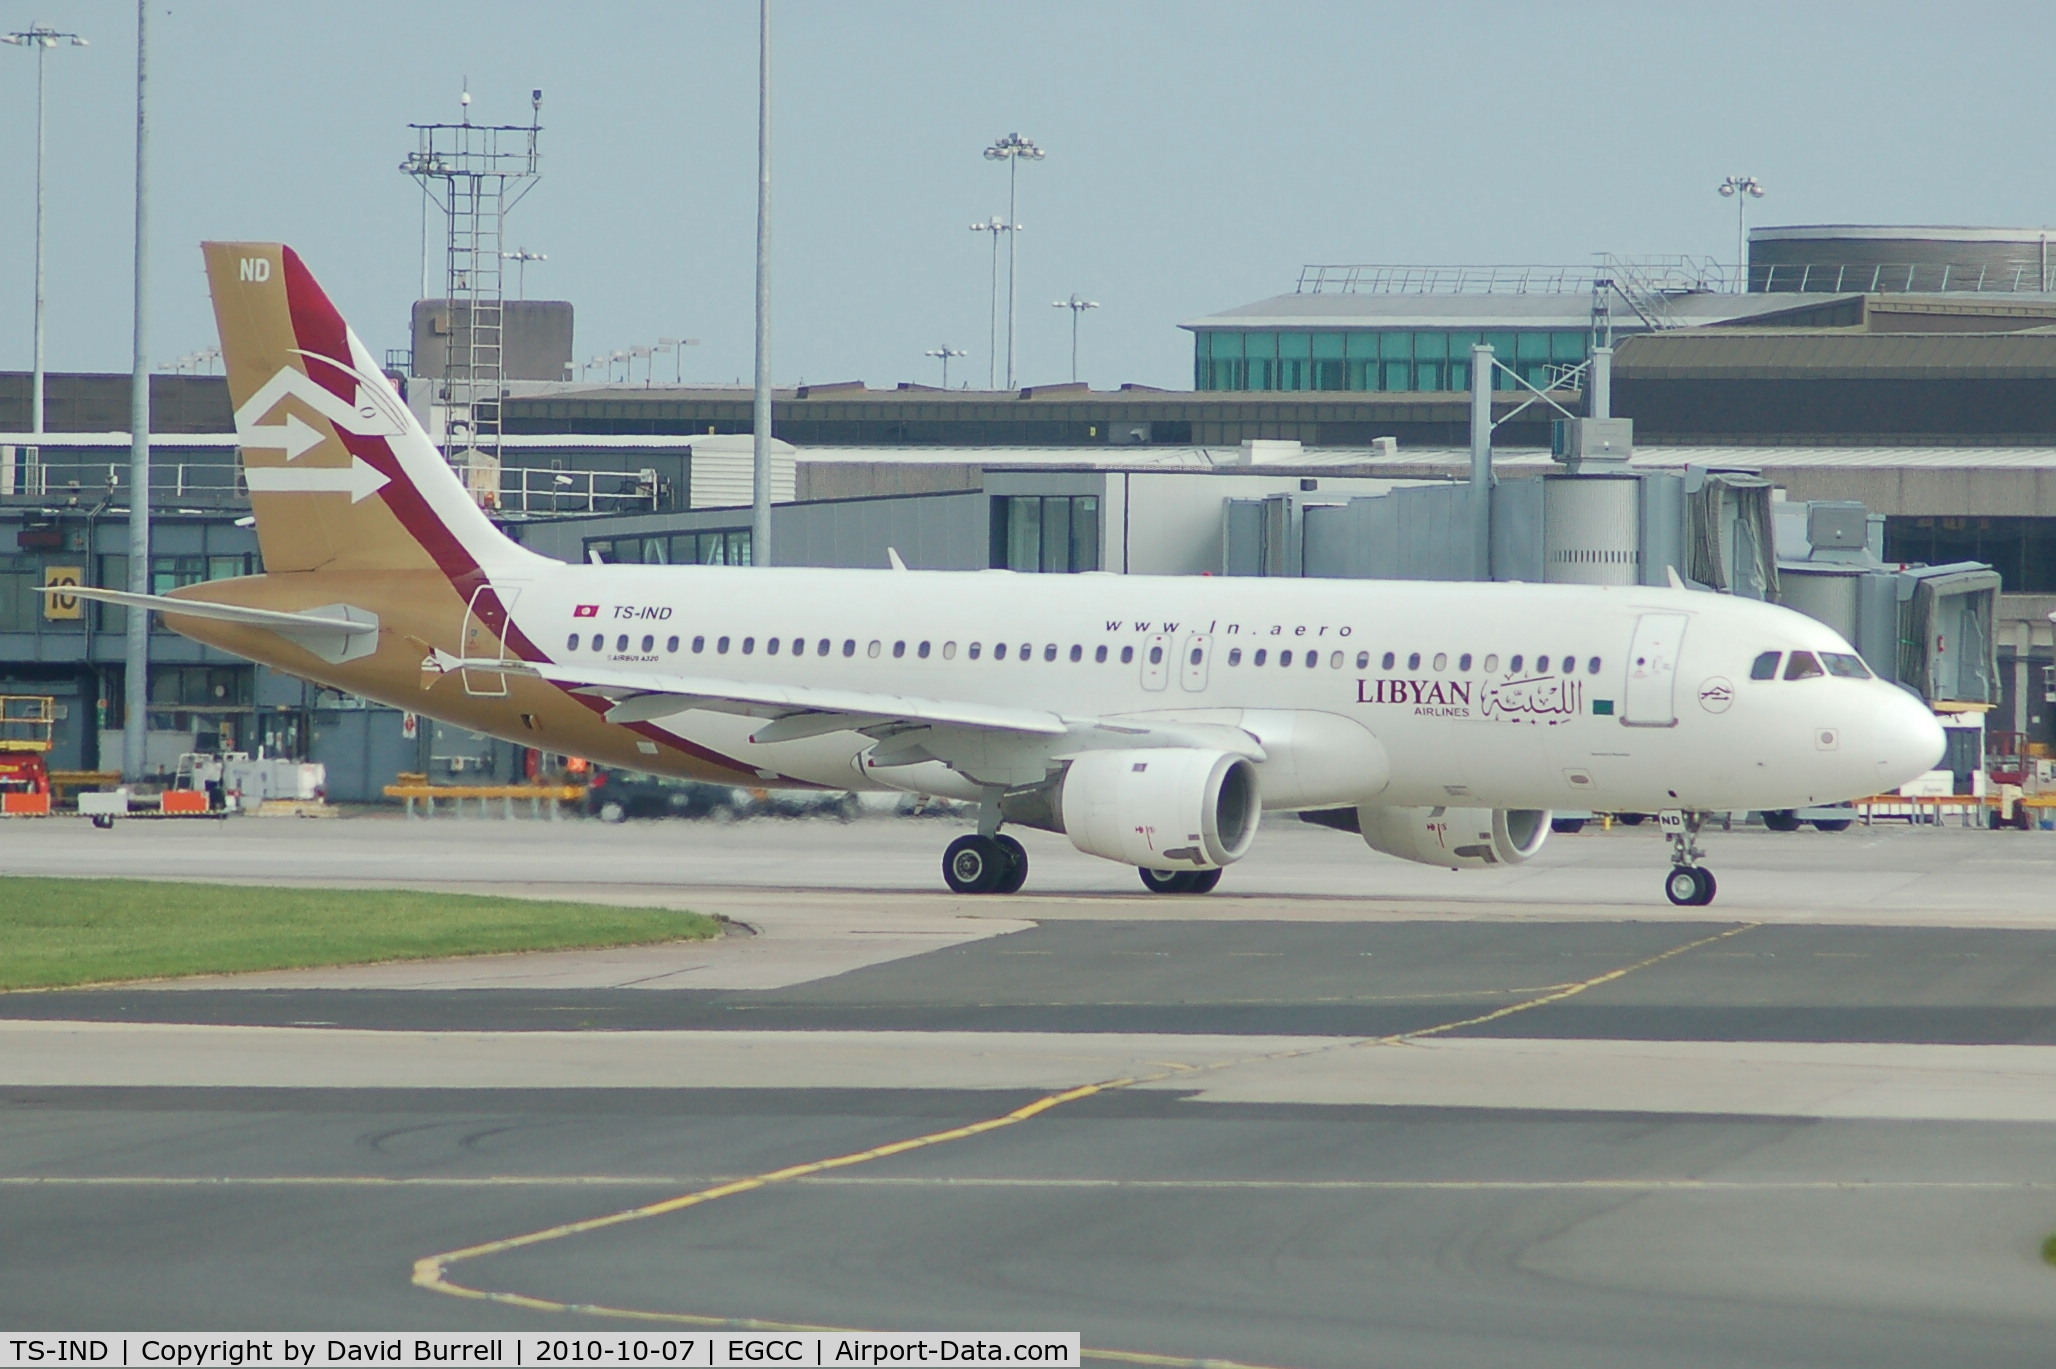 TS-IND, 1992 Airbus A320-212 C/N 348, Libyan Airlines Airbus A320-212 taxiing at Manchester Airport